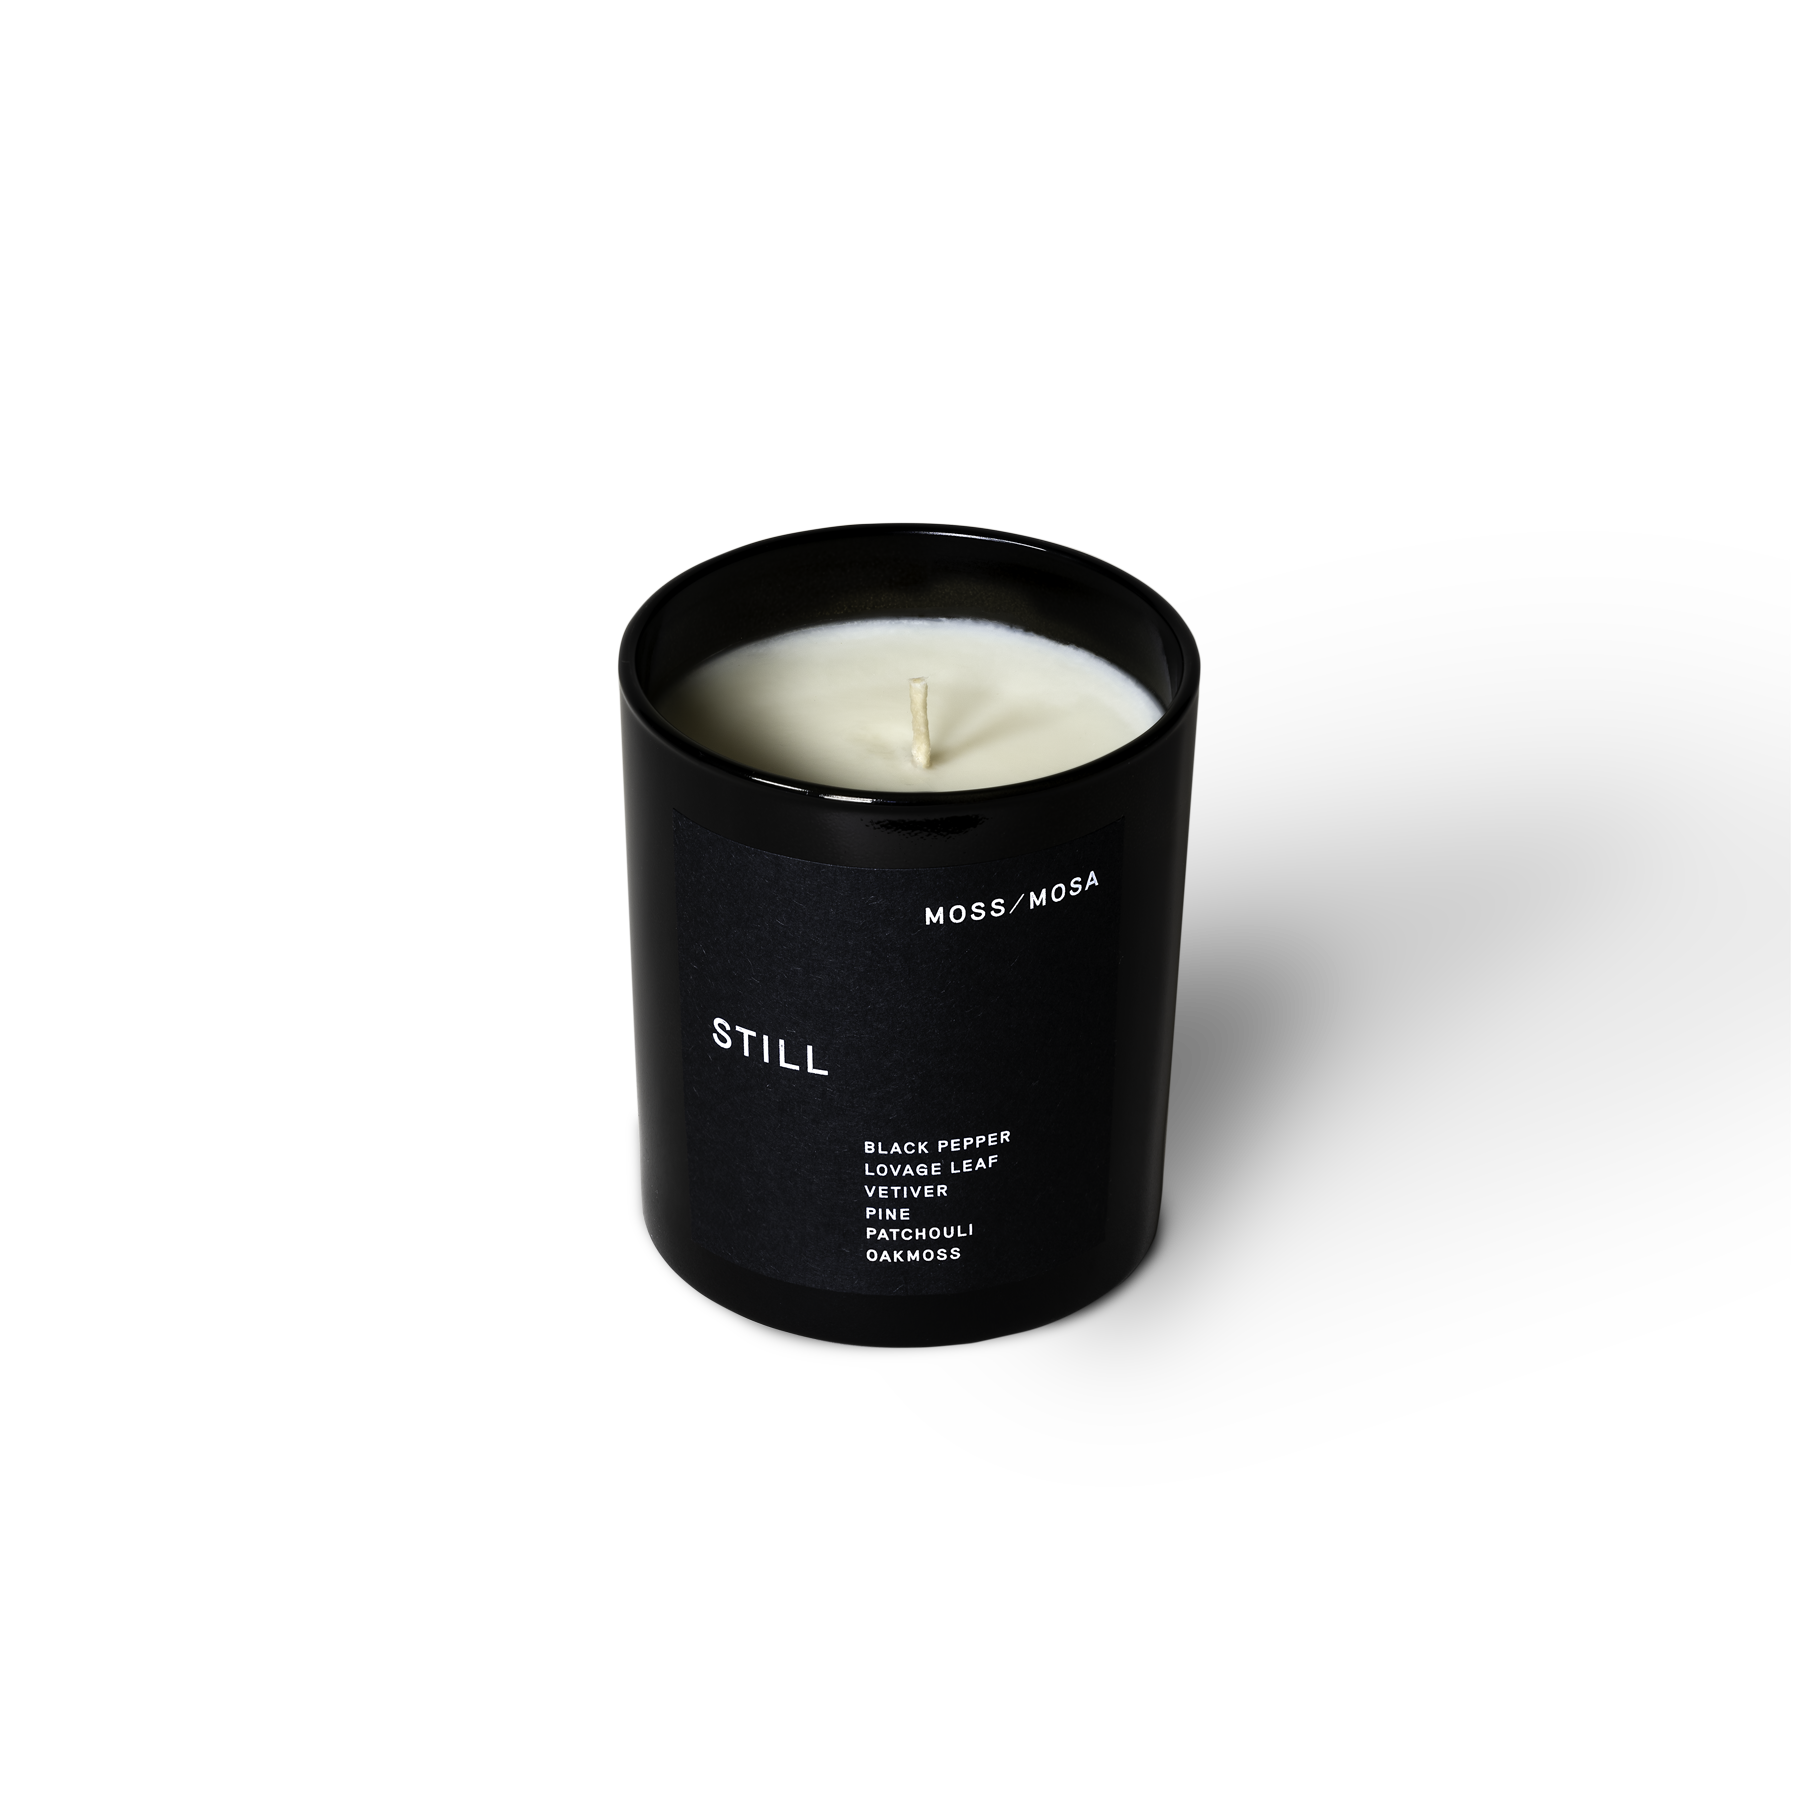 Natural Soy Wax Luxury Candle made in the UK. Notes of Black Pepper, Lovage Leaf, Vetiver, Pine, Patchouli, Oakmoss. Moss Candle that is an aromatic scent. Black pepper and Patchouli give a spicy glow to this otherwise herbaceous candle that is given a hidden depth through the little known Lovage Leaf. 45 hours 270g